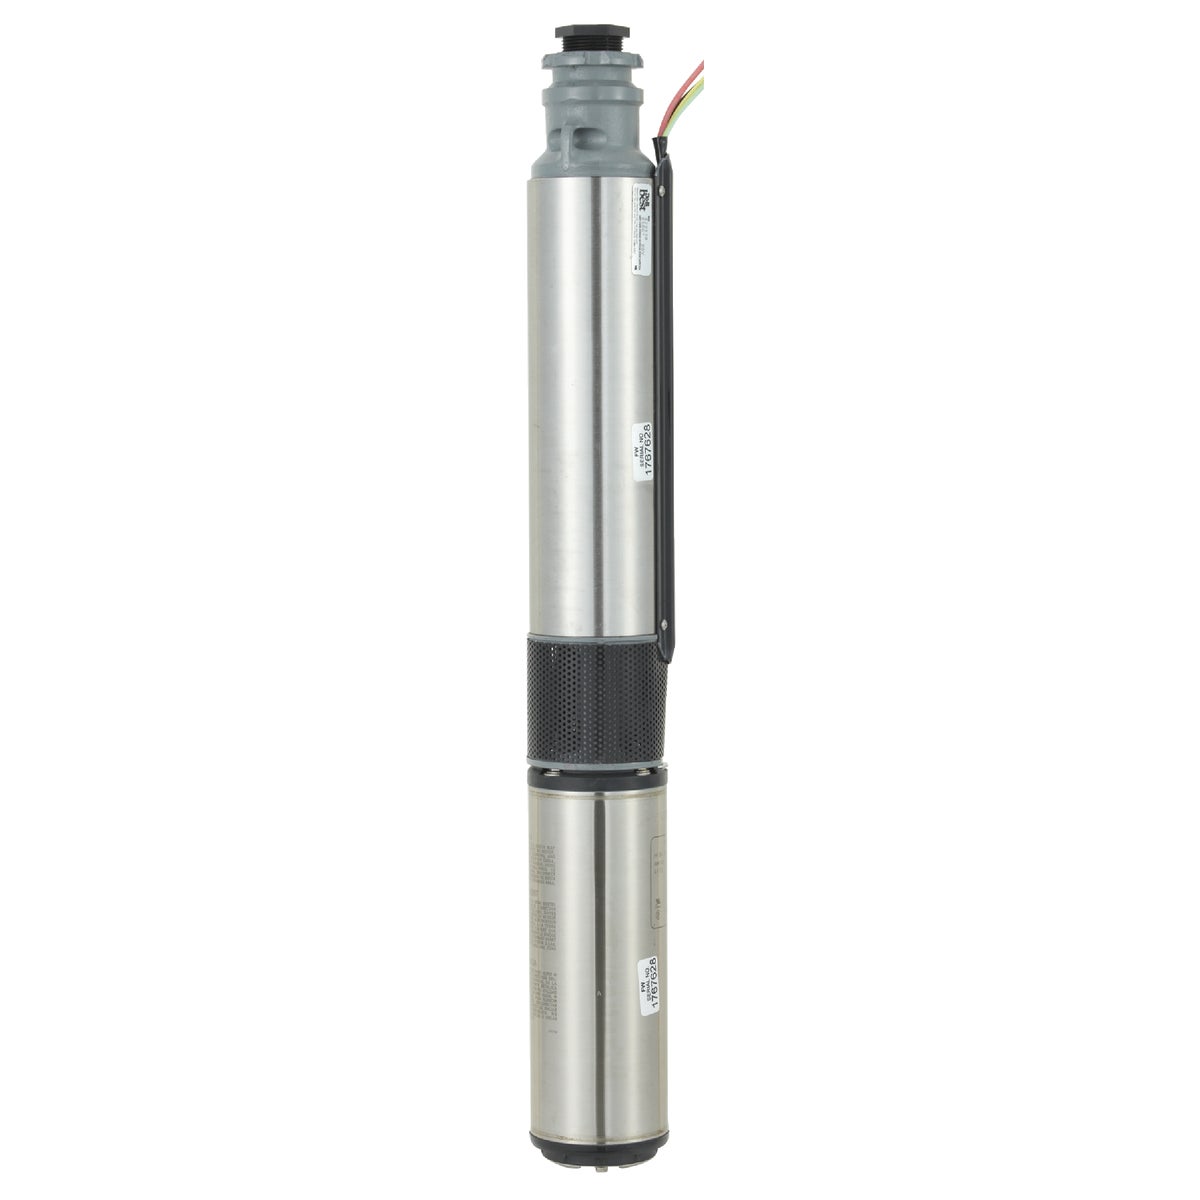 Star Water Systems 3/4 HP Submersible Well Pump, 3W 230V